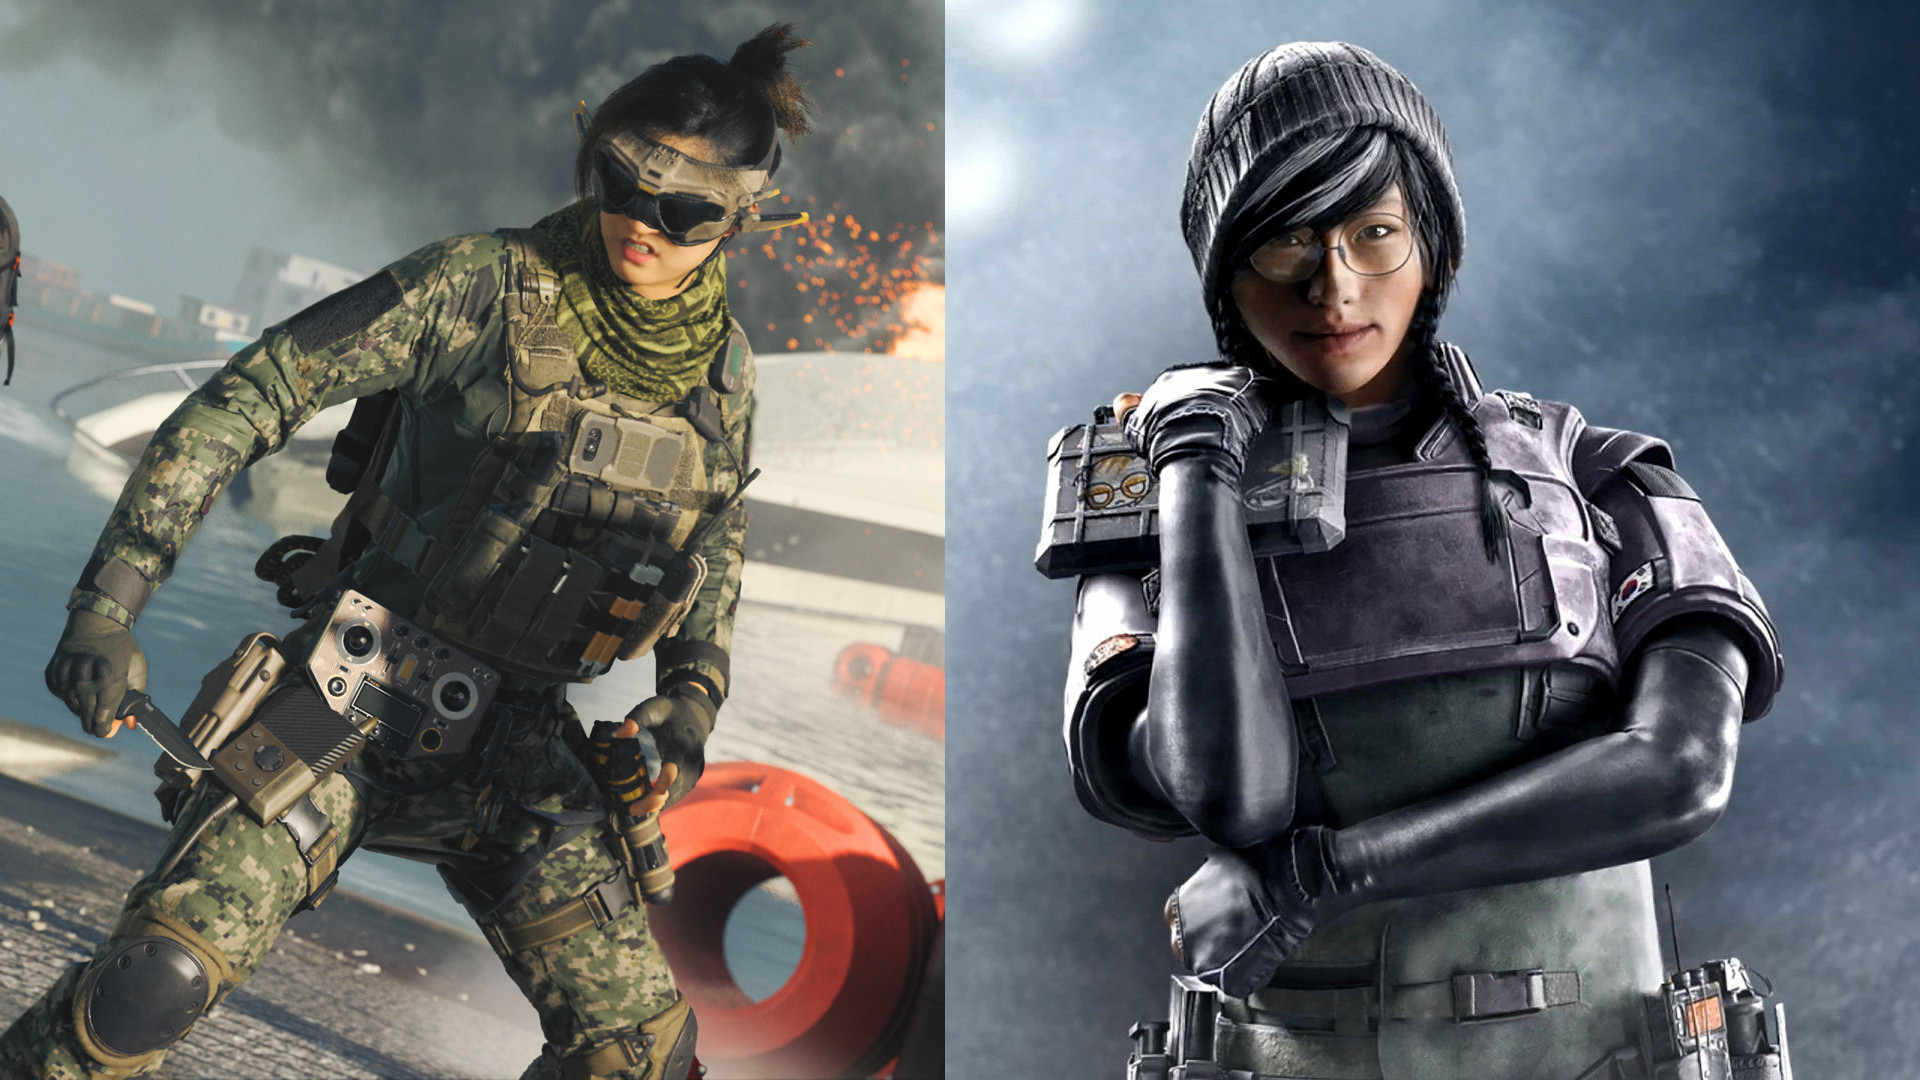 Call of Duty’s new operator looks like a popular Rainbow Six Siege character with the exact same name, and Ubisoft has taken notice: ‘Seriously?’